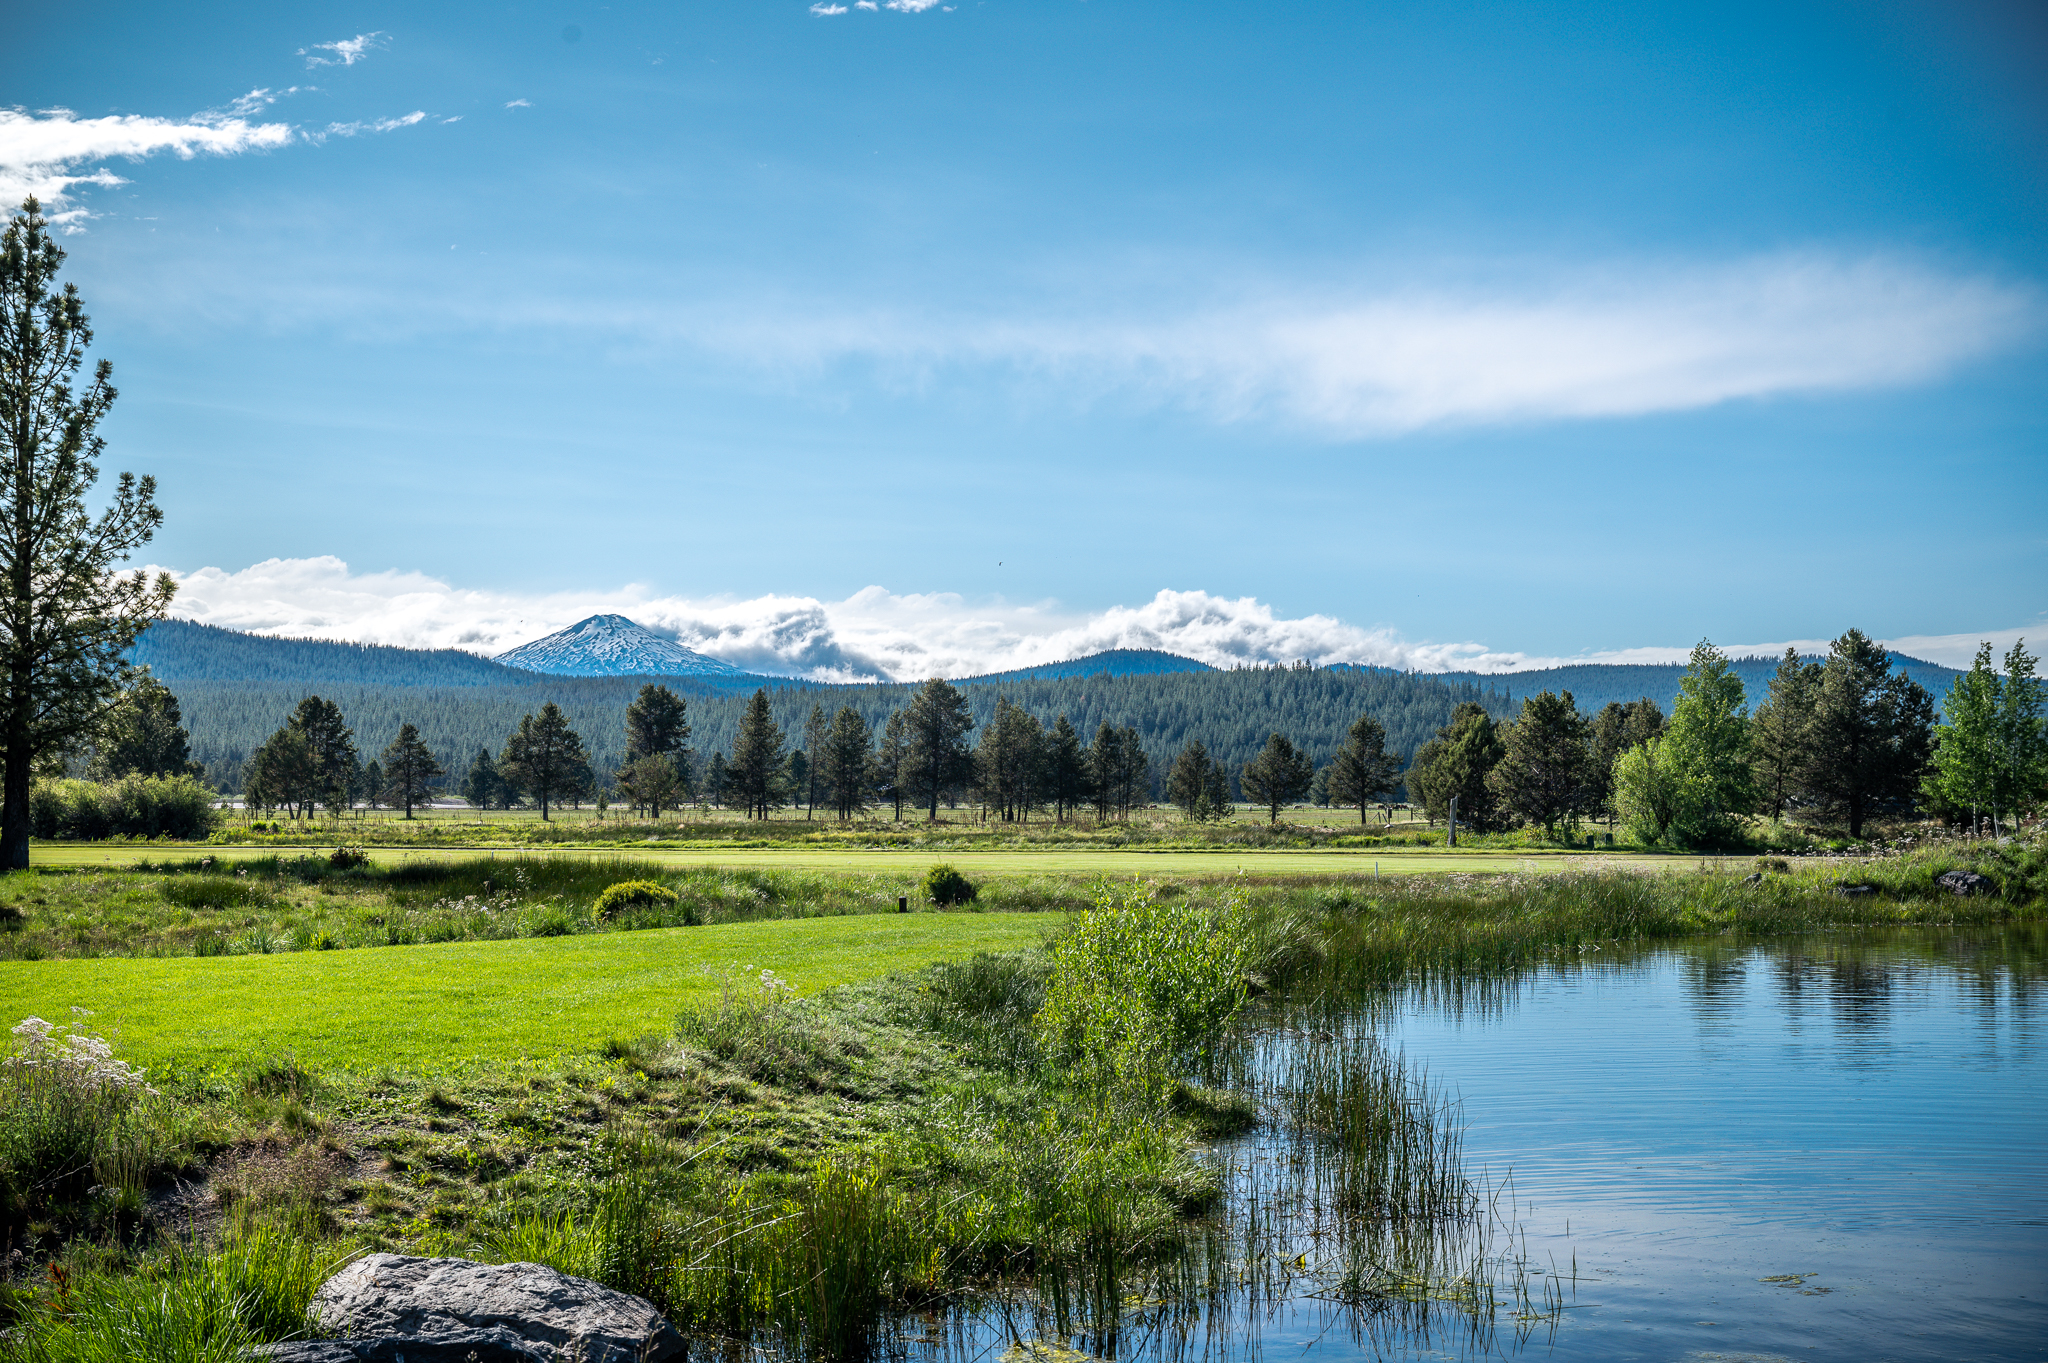 Views of Mount Bachelor from Sunriver